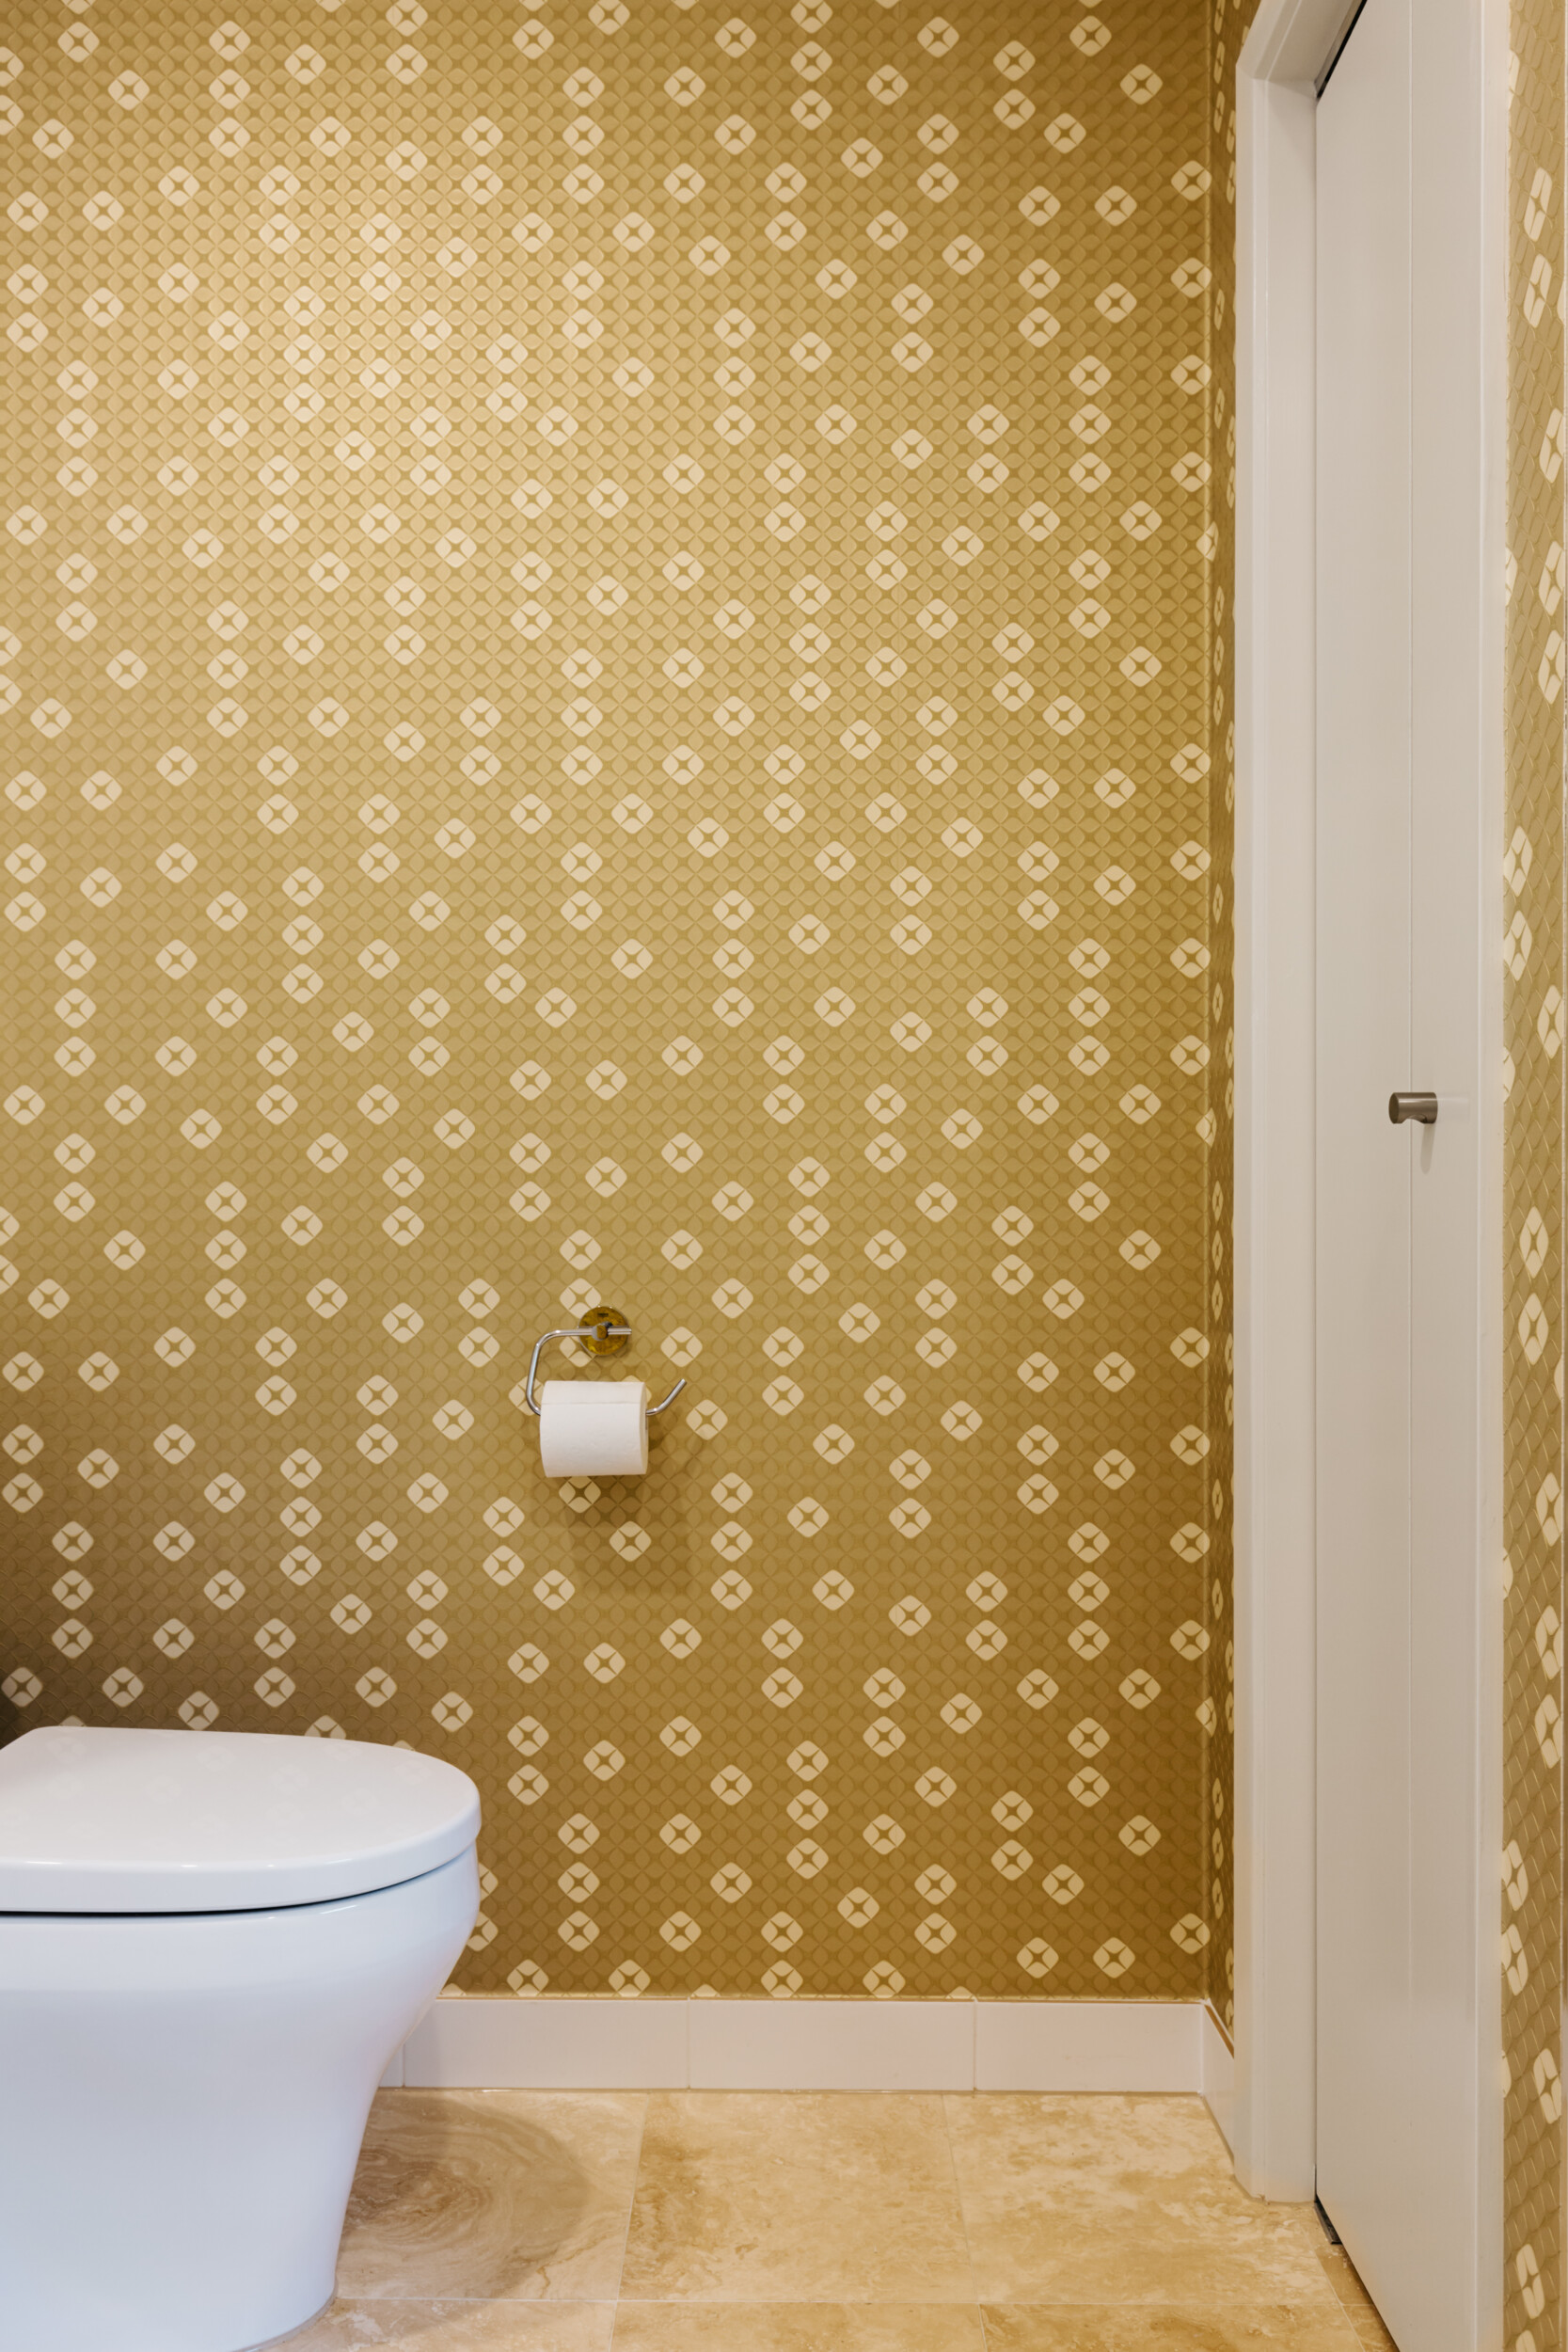 Bathroom Wallpaper Ideas That Are Certain To Inspire - Décor Aid